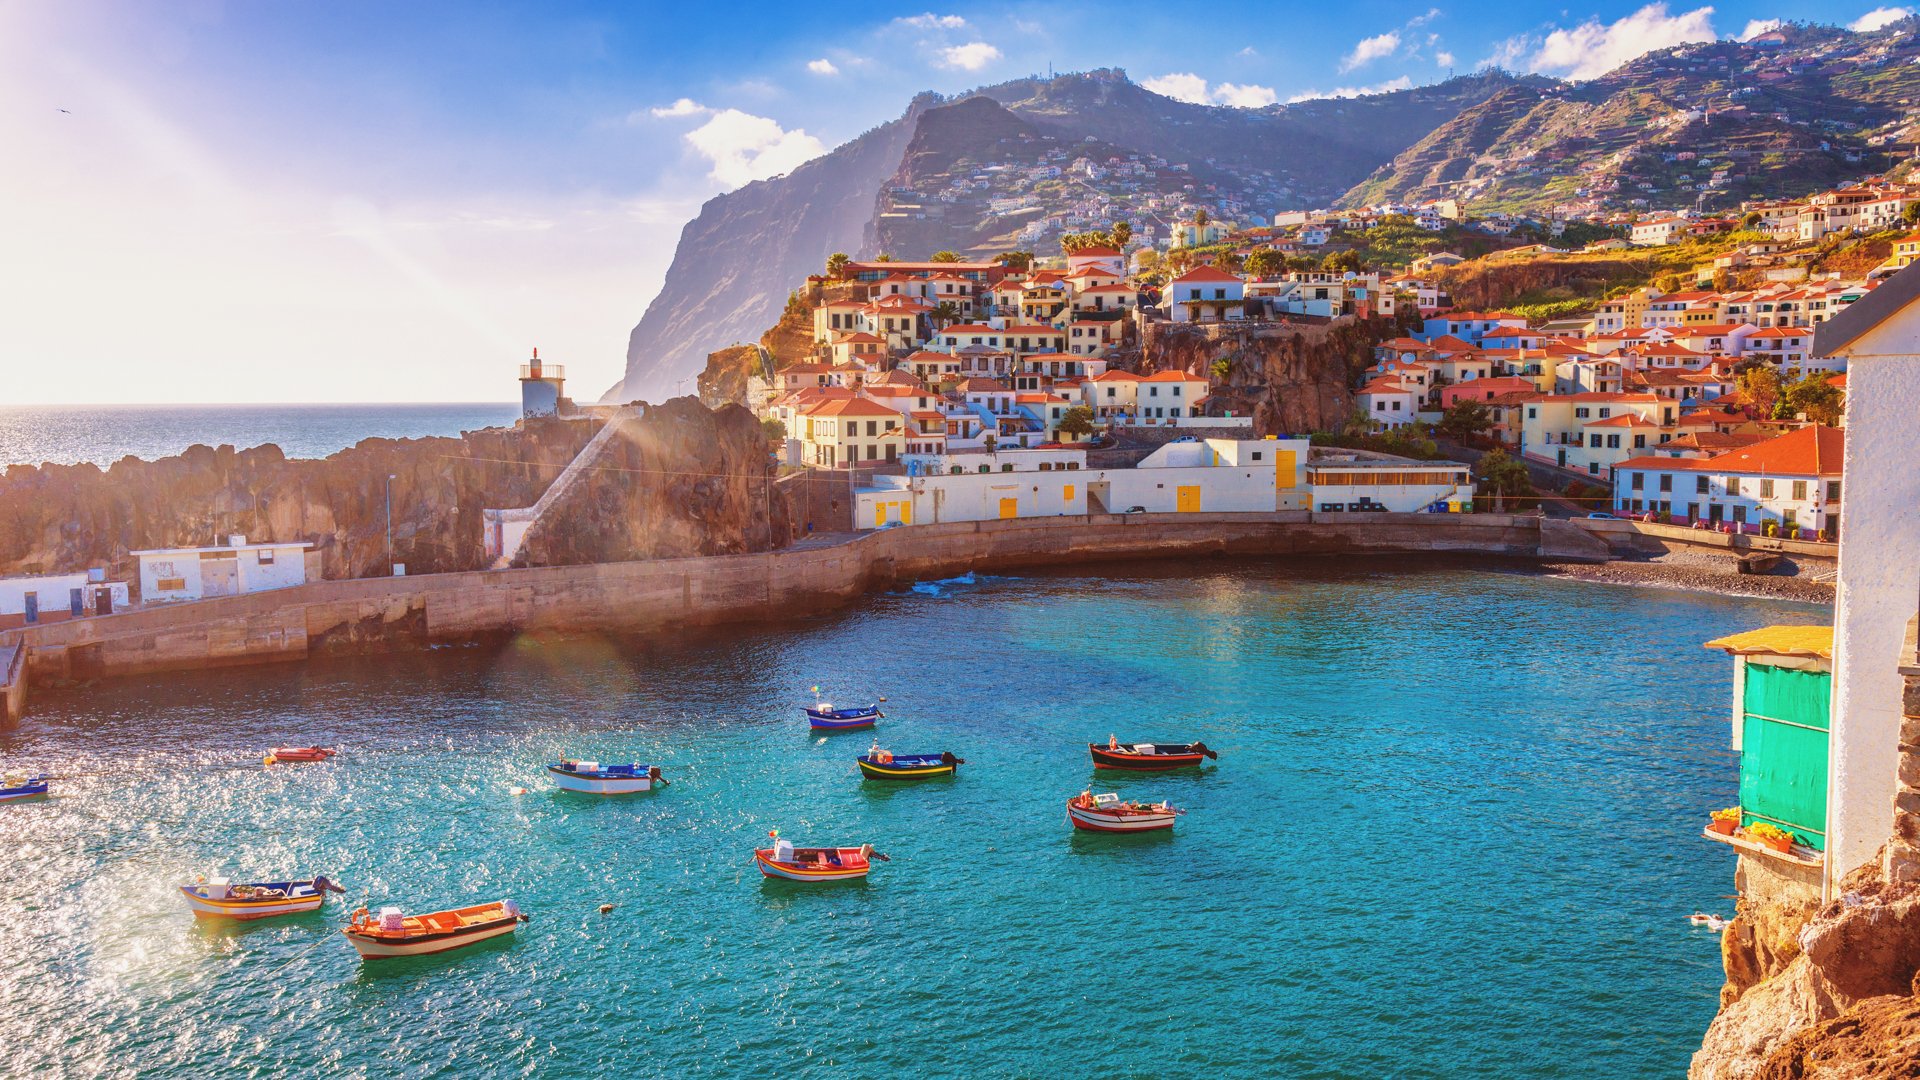 9 Safest Places To Retire Abroad for Less Than $2,000 a Month